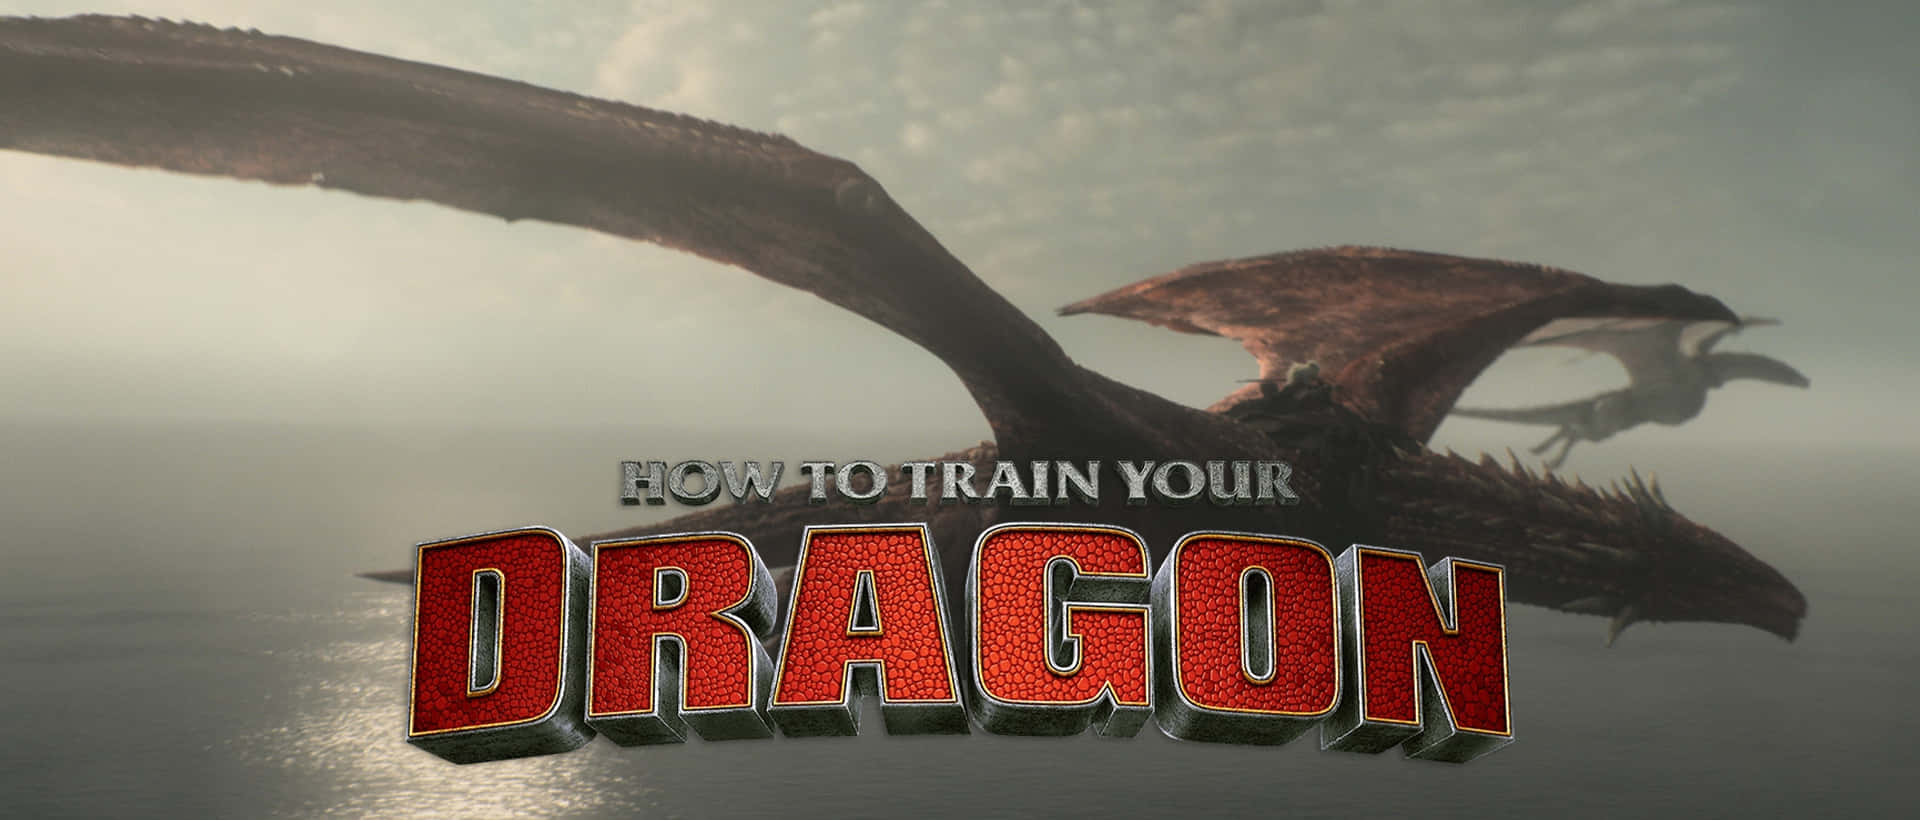 How To Train Your Dragon Universal Ocean Picture